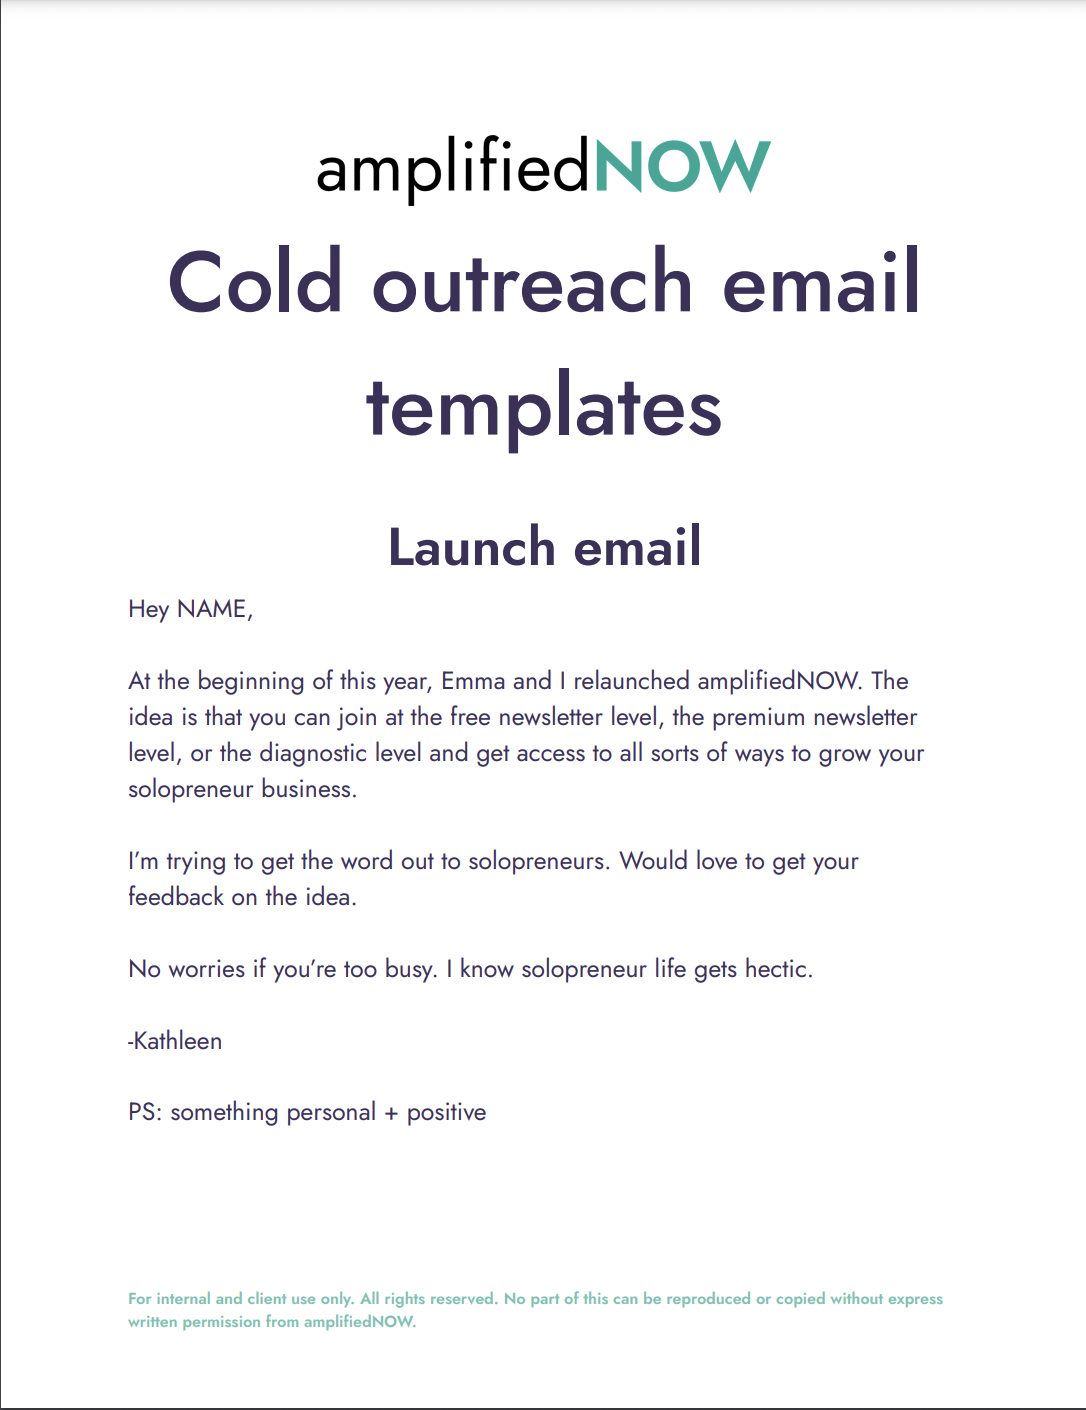 Cold outreach email templates